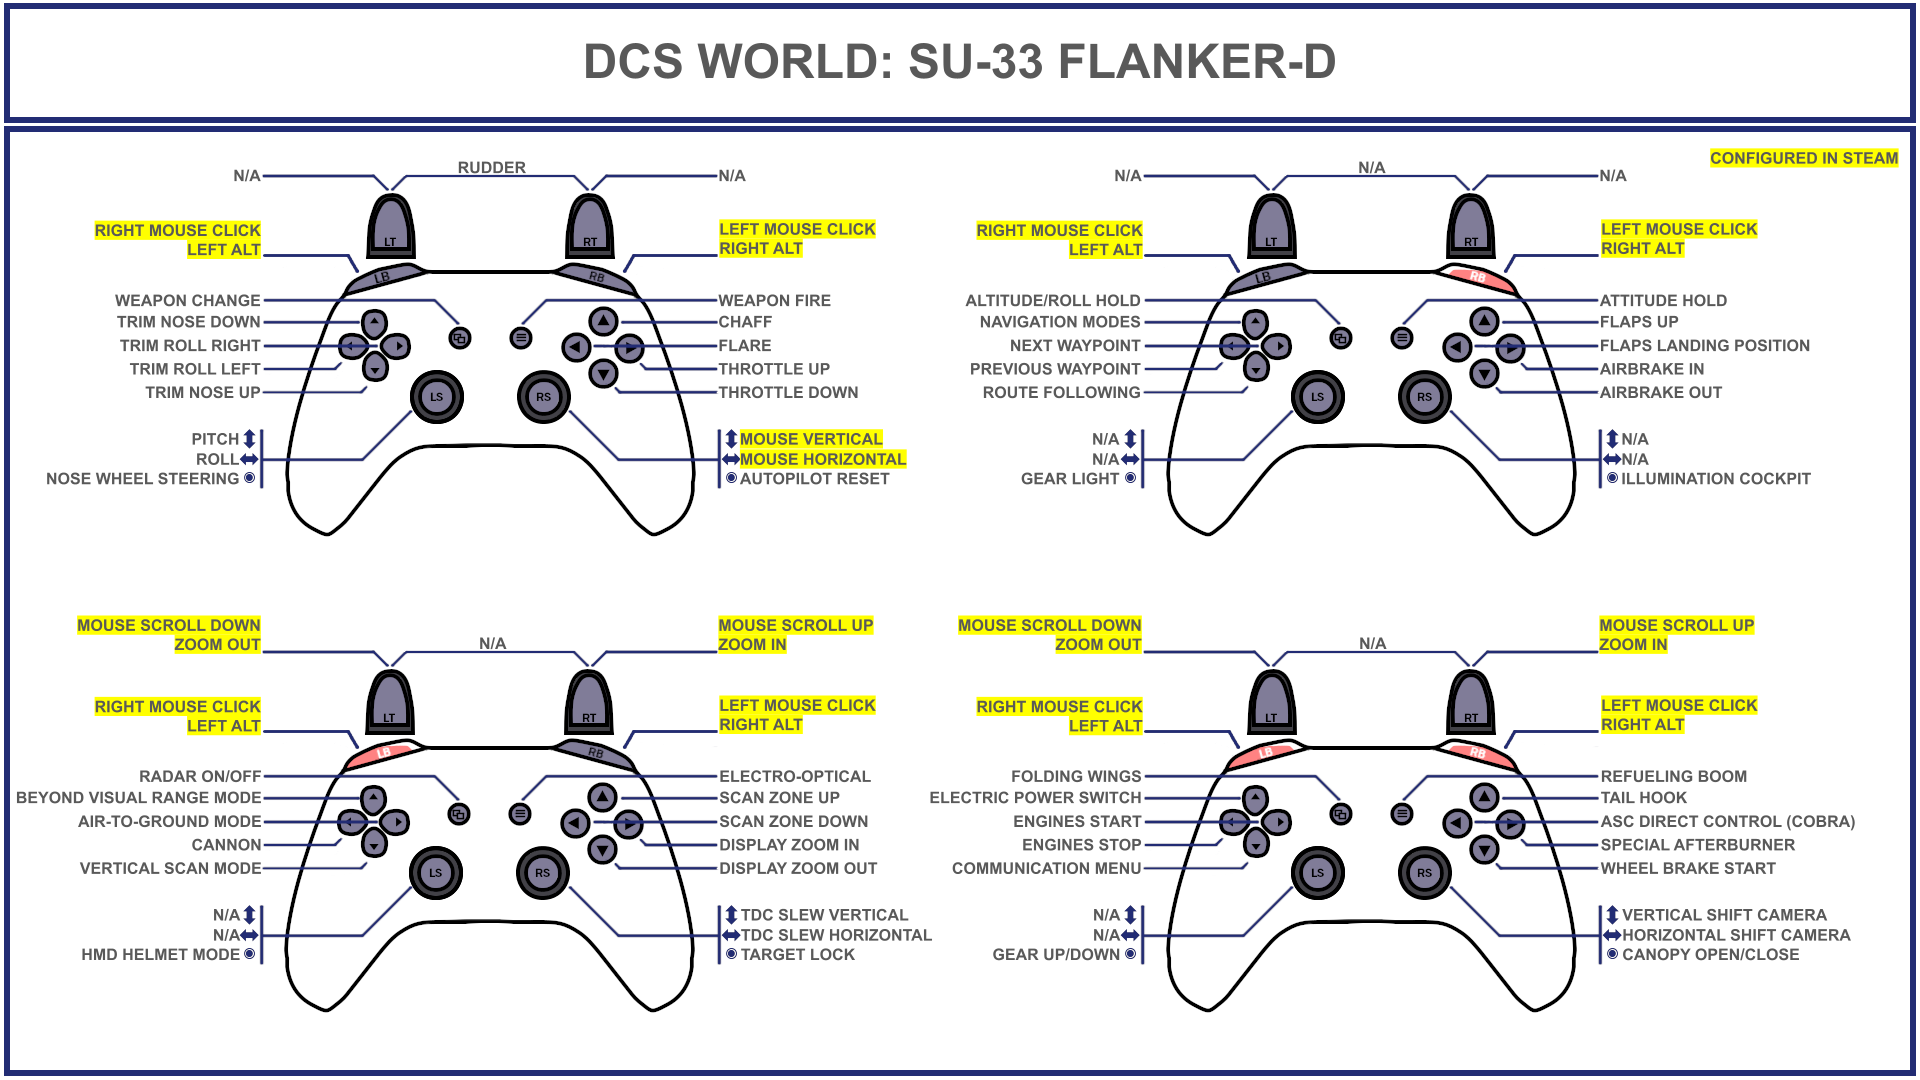 Tuuvas' Official Su-33 Flanker-D Gamepad Controller Layout